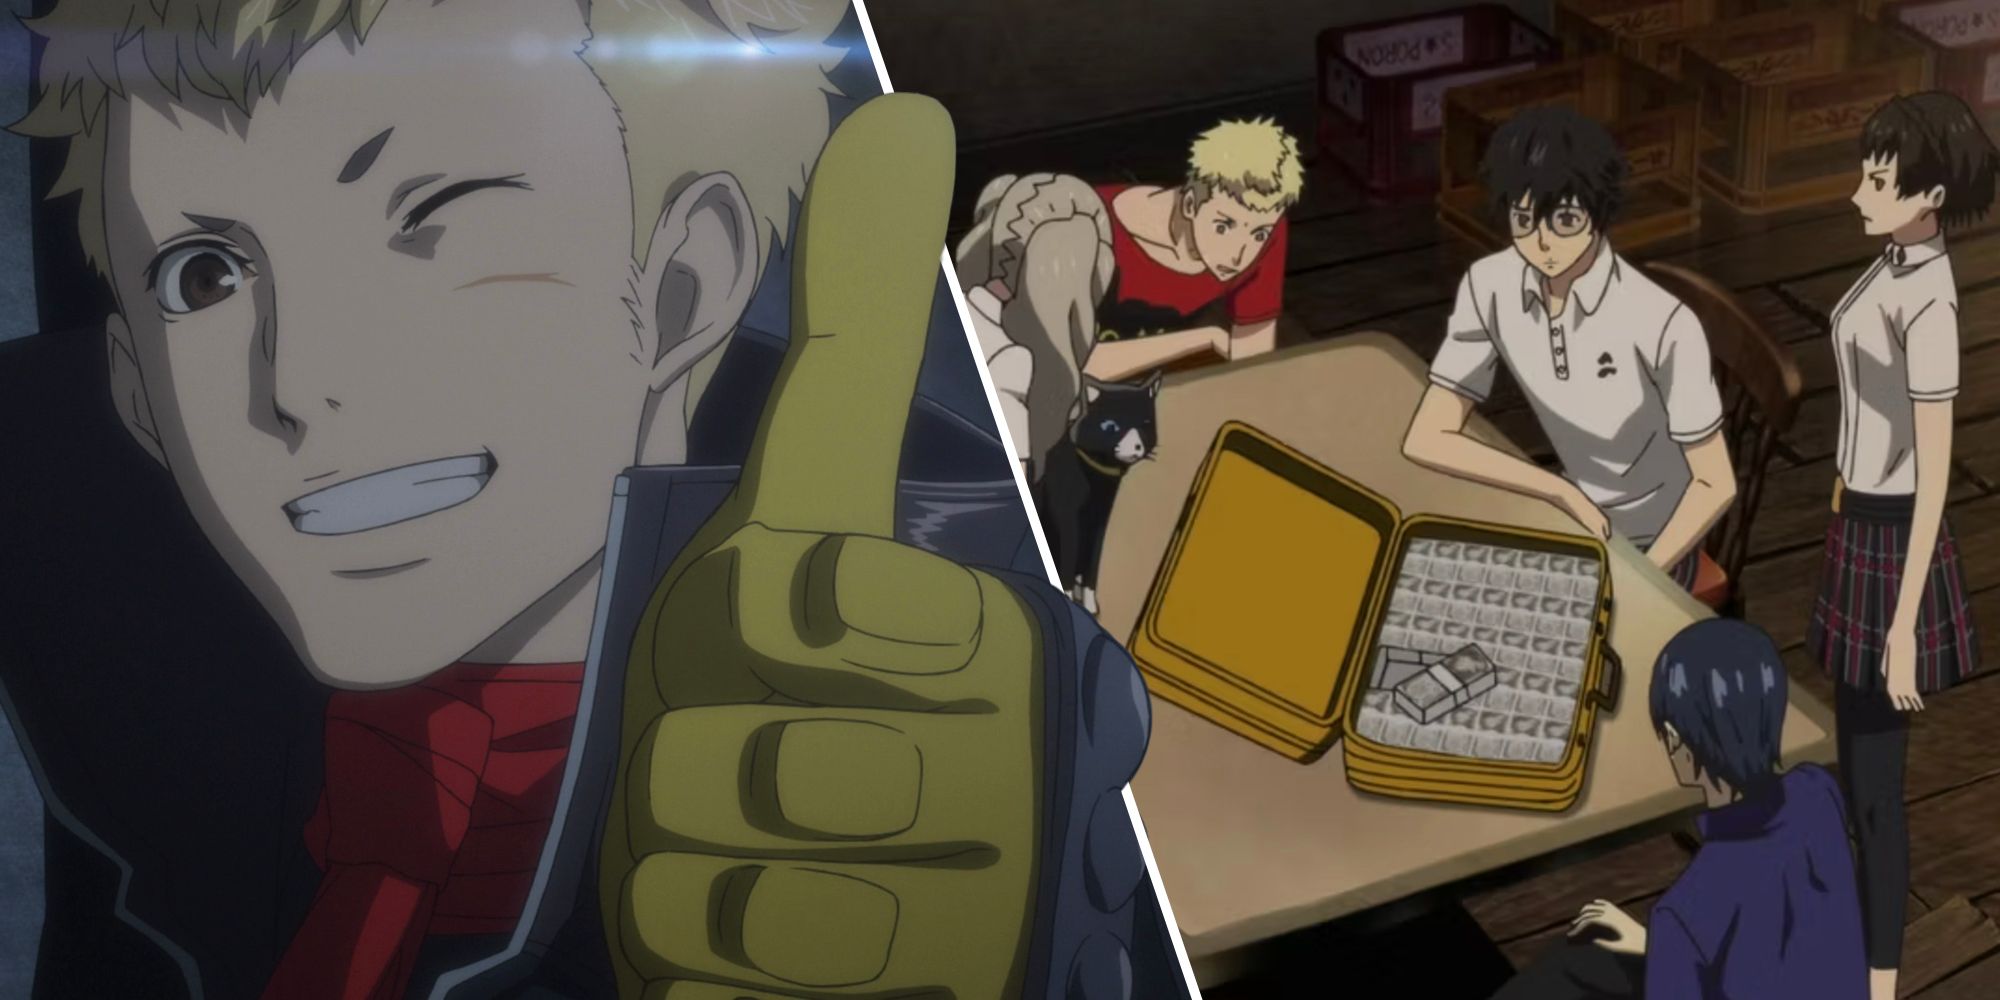 Ryuji approving the money found by the gang in Persona 5